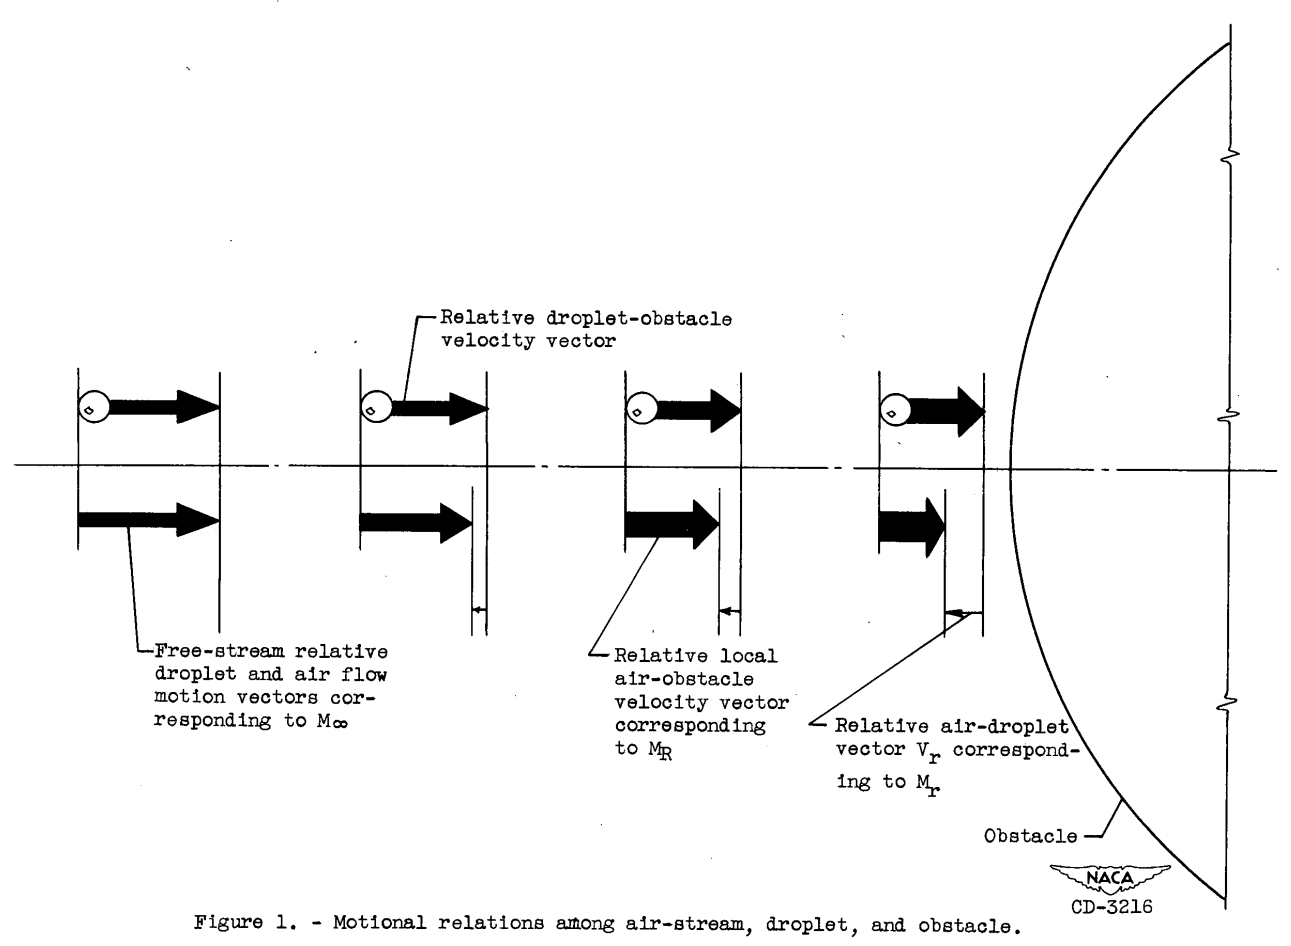 Figure 1. Motional relationships among air-stream, droplet, and obstacle.